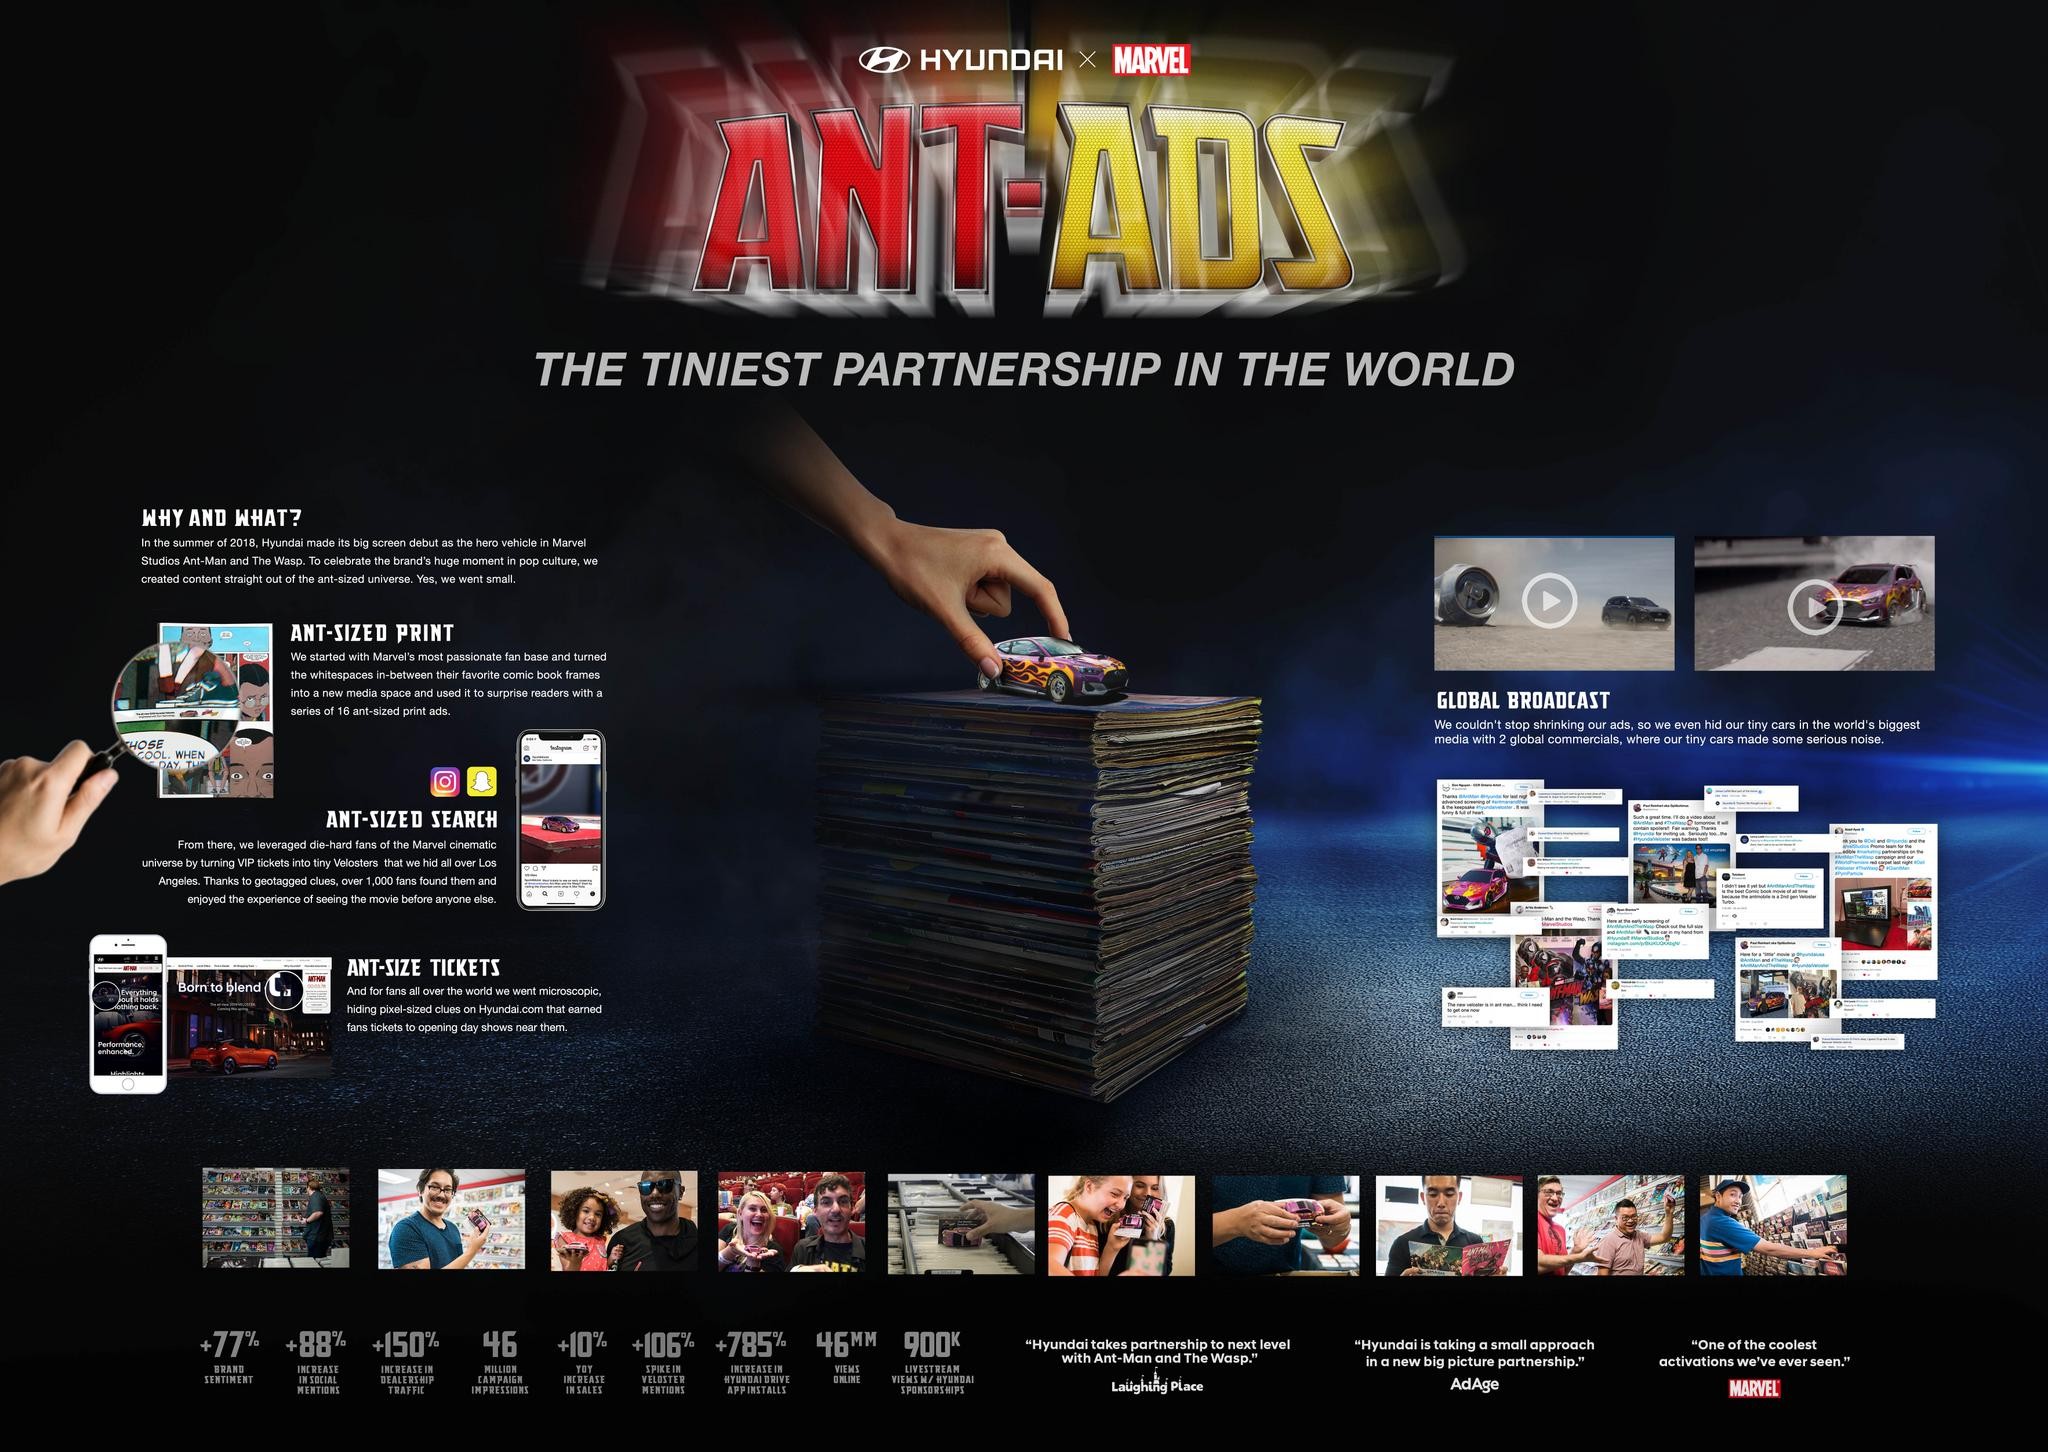 ANT-ADS - THE TINIEST PARTNERSHIP IN THE WORLD